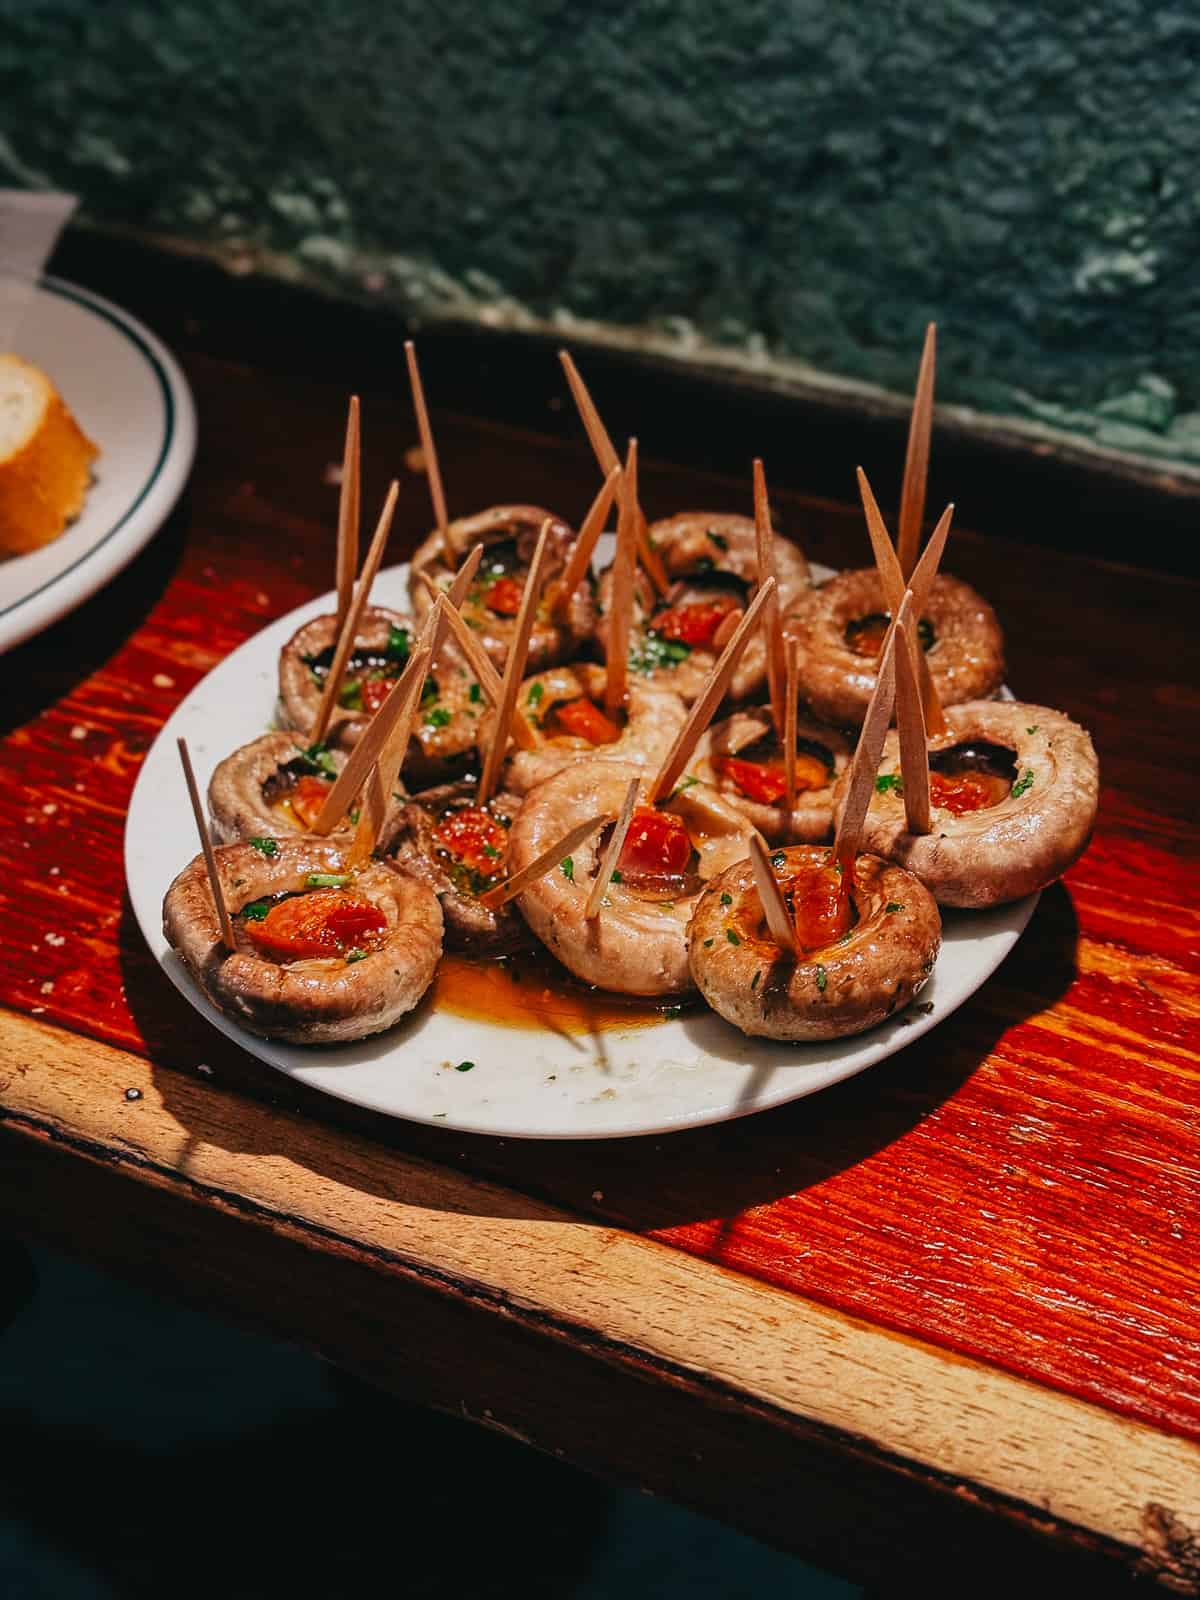 A close-up of grilled mushrooms topped with herbs and tomato on a white plate with toothpicks, served as tapas on a wooden bar counter, embodying a traditional Spanish appetizer.